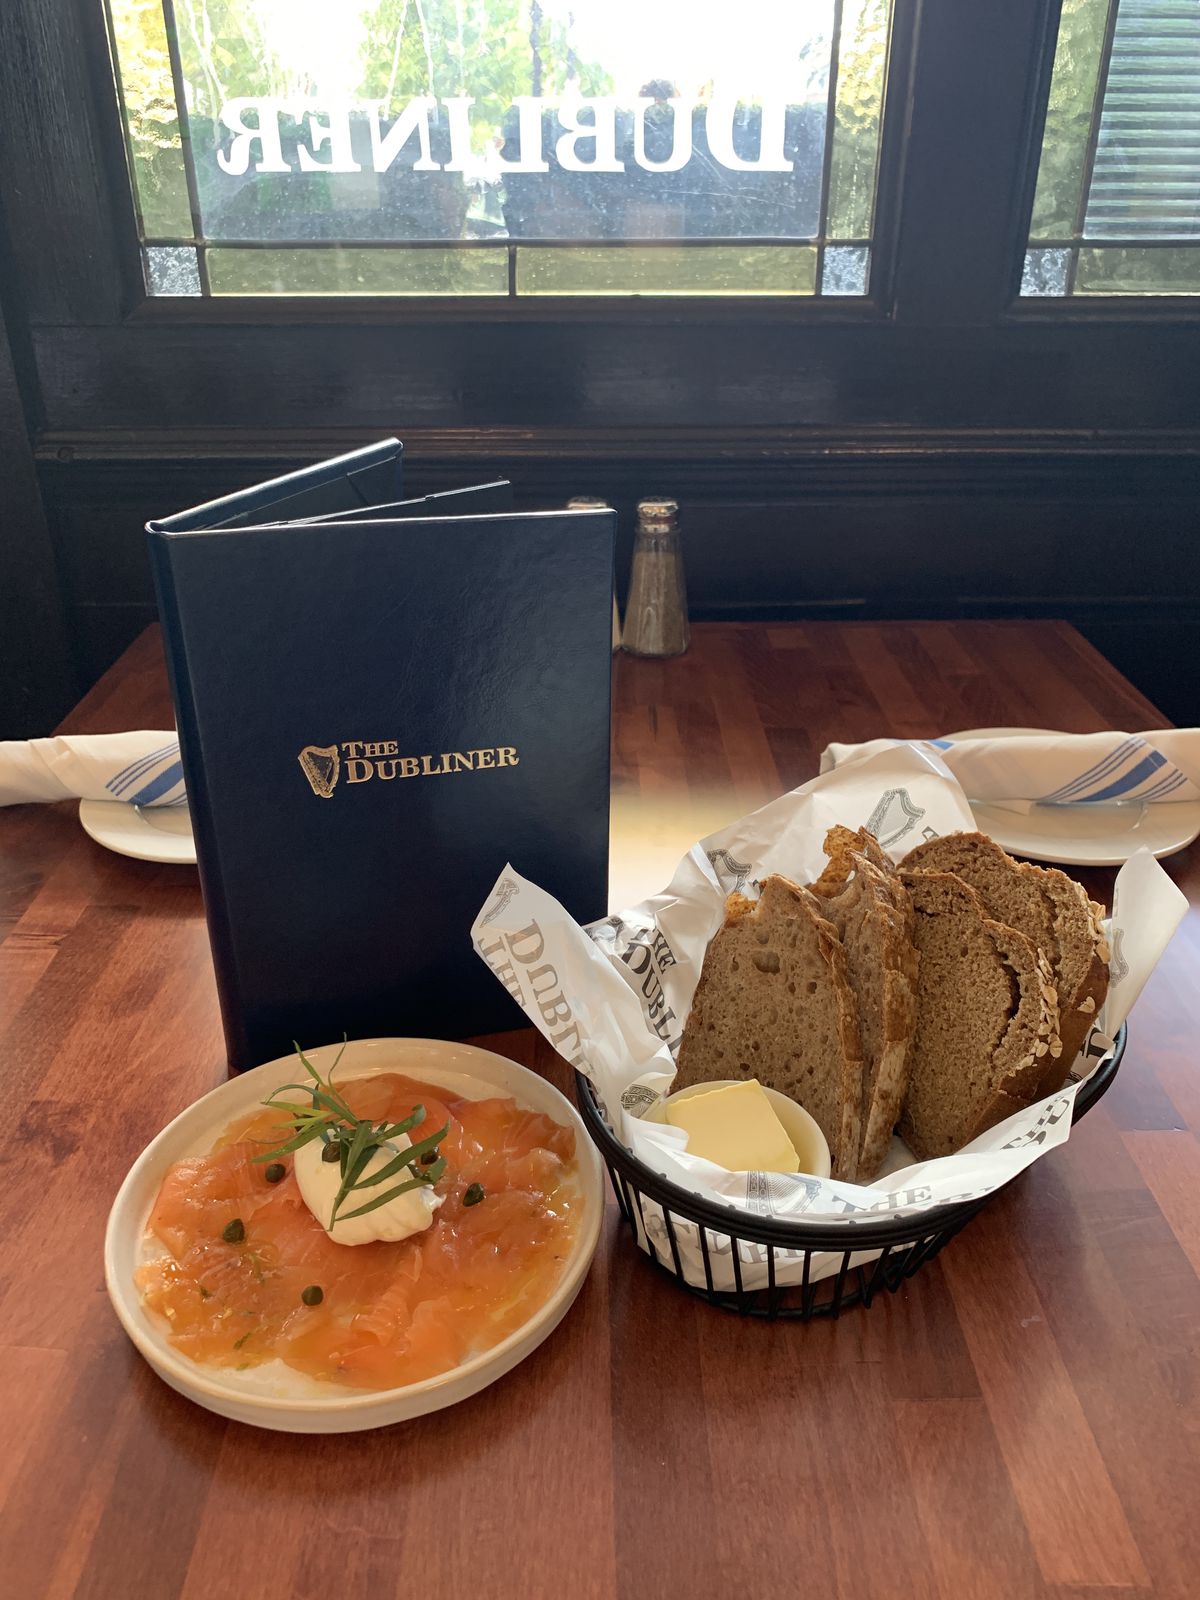 A basket of Irish breads served with a plate of smoked salmon.